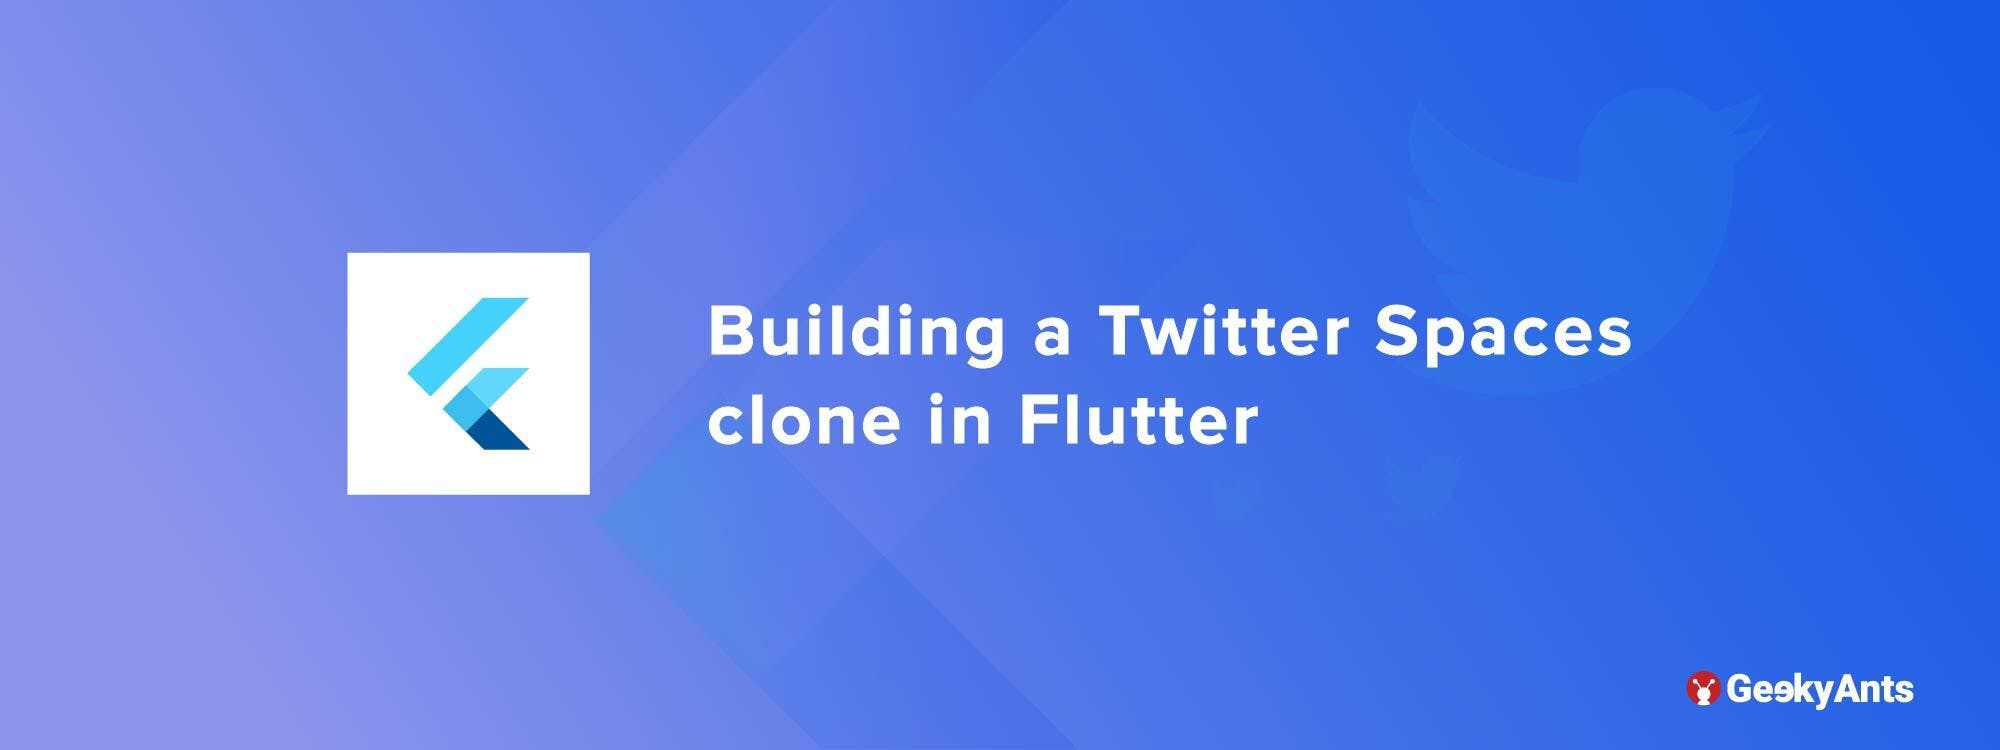 Building a Twitter Spaces clone in Flutter